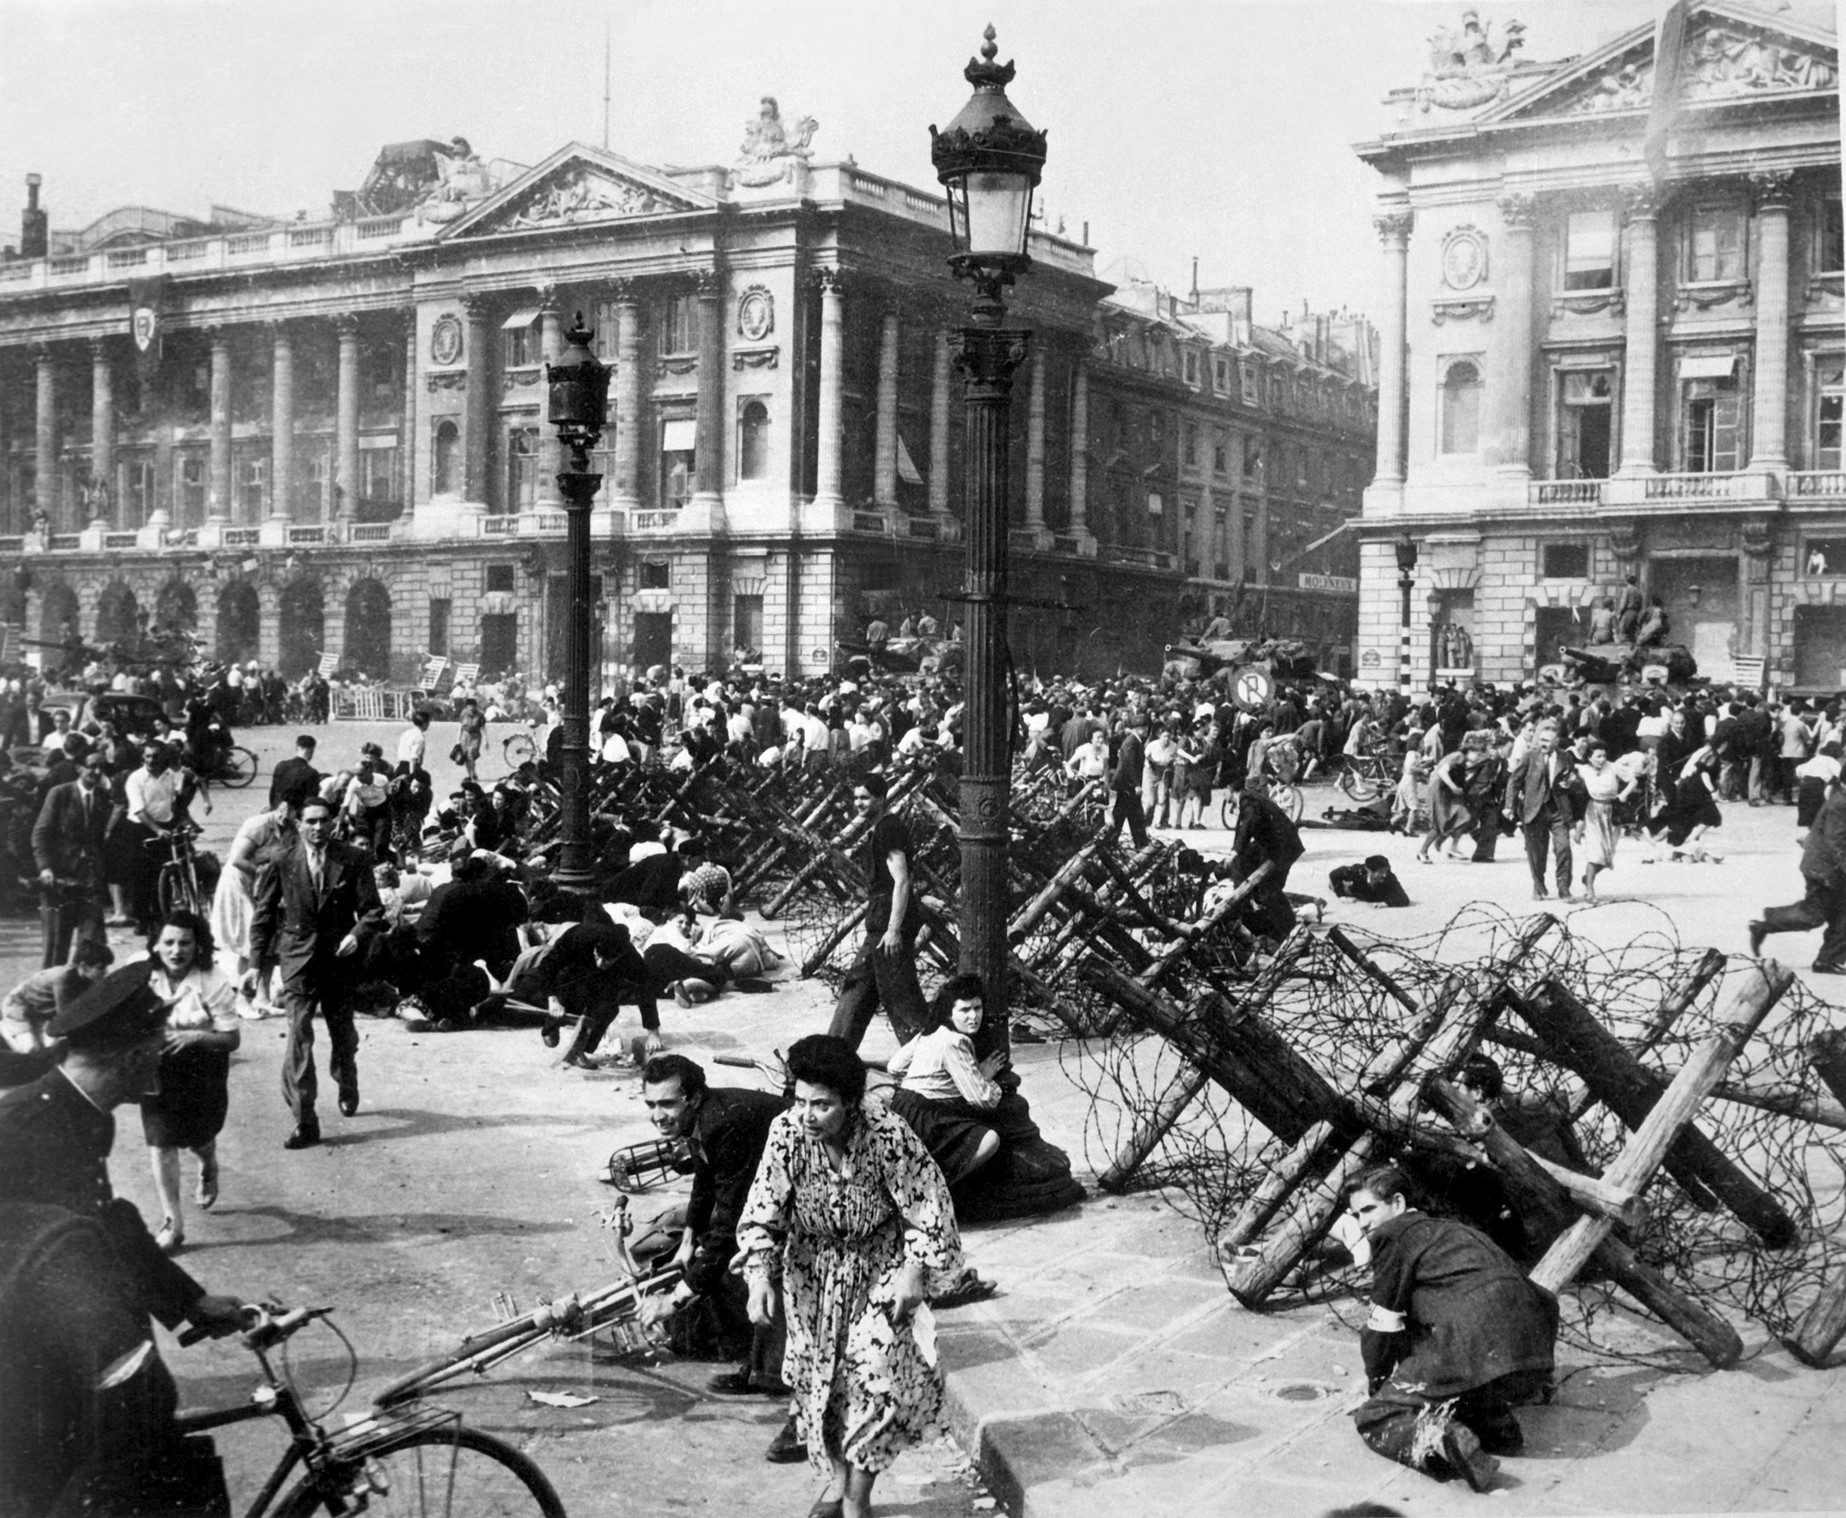 As allied troops enter Paris on 26 August, celebrating crowds on place De La Concorde scatter for cover from small bands of remaining German snipers